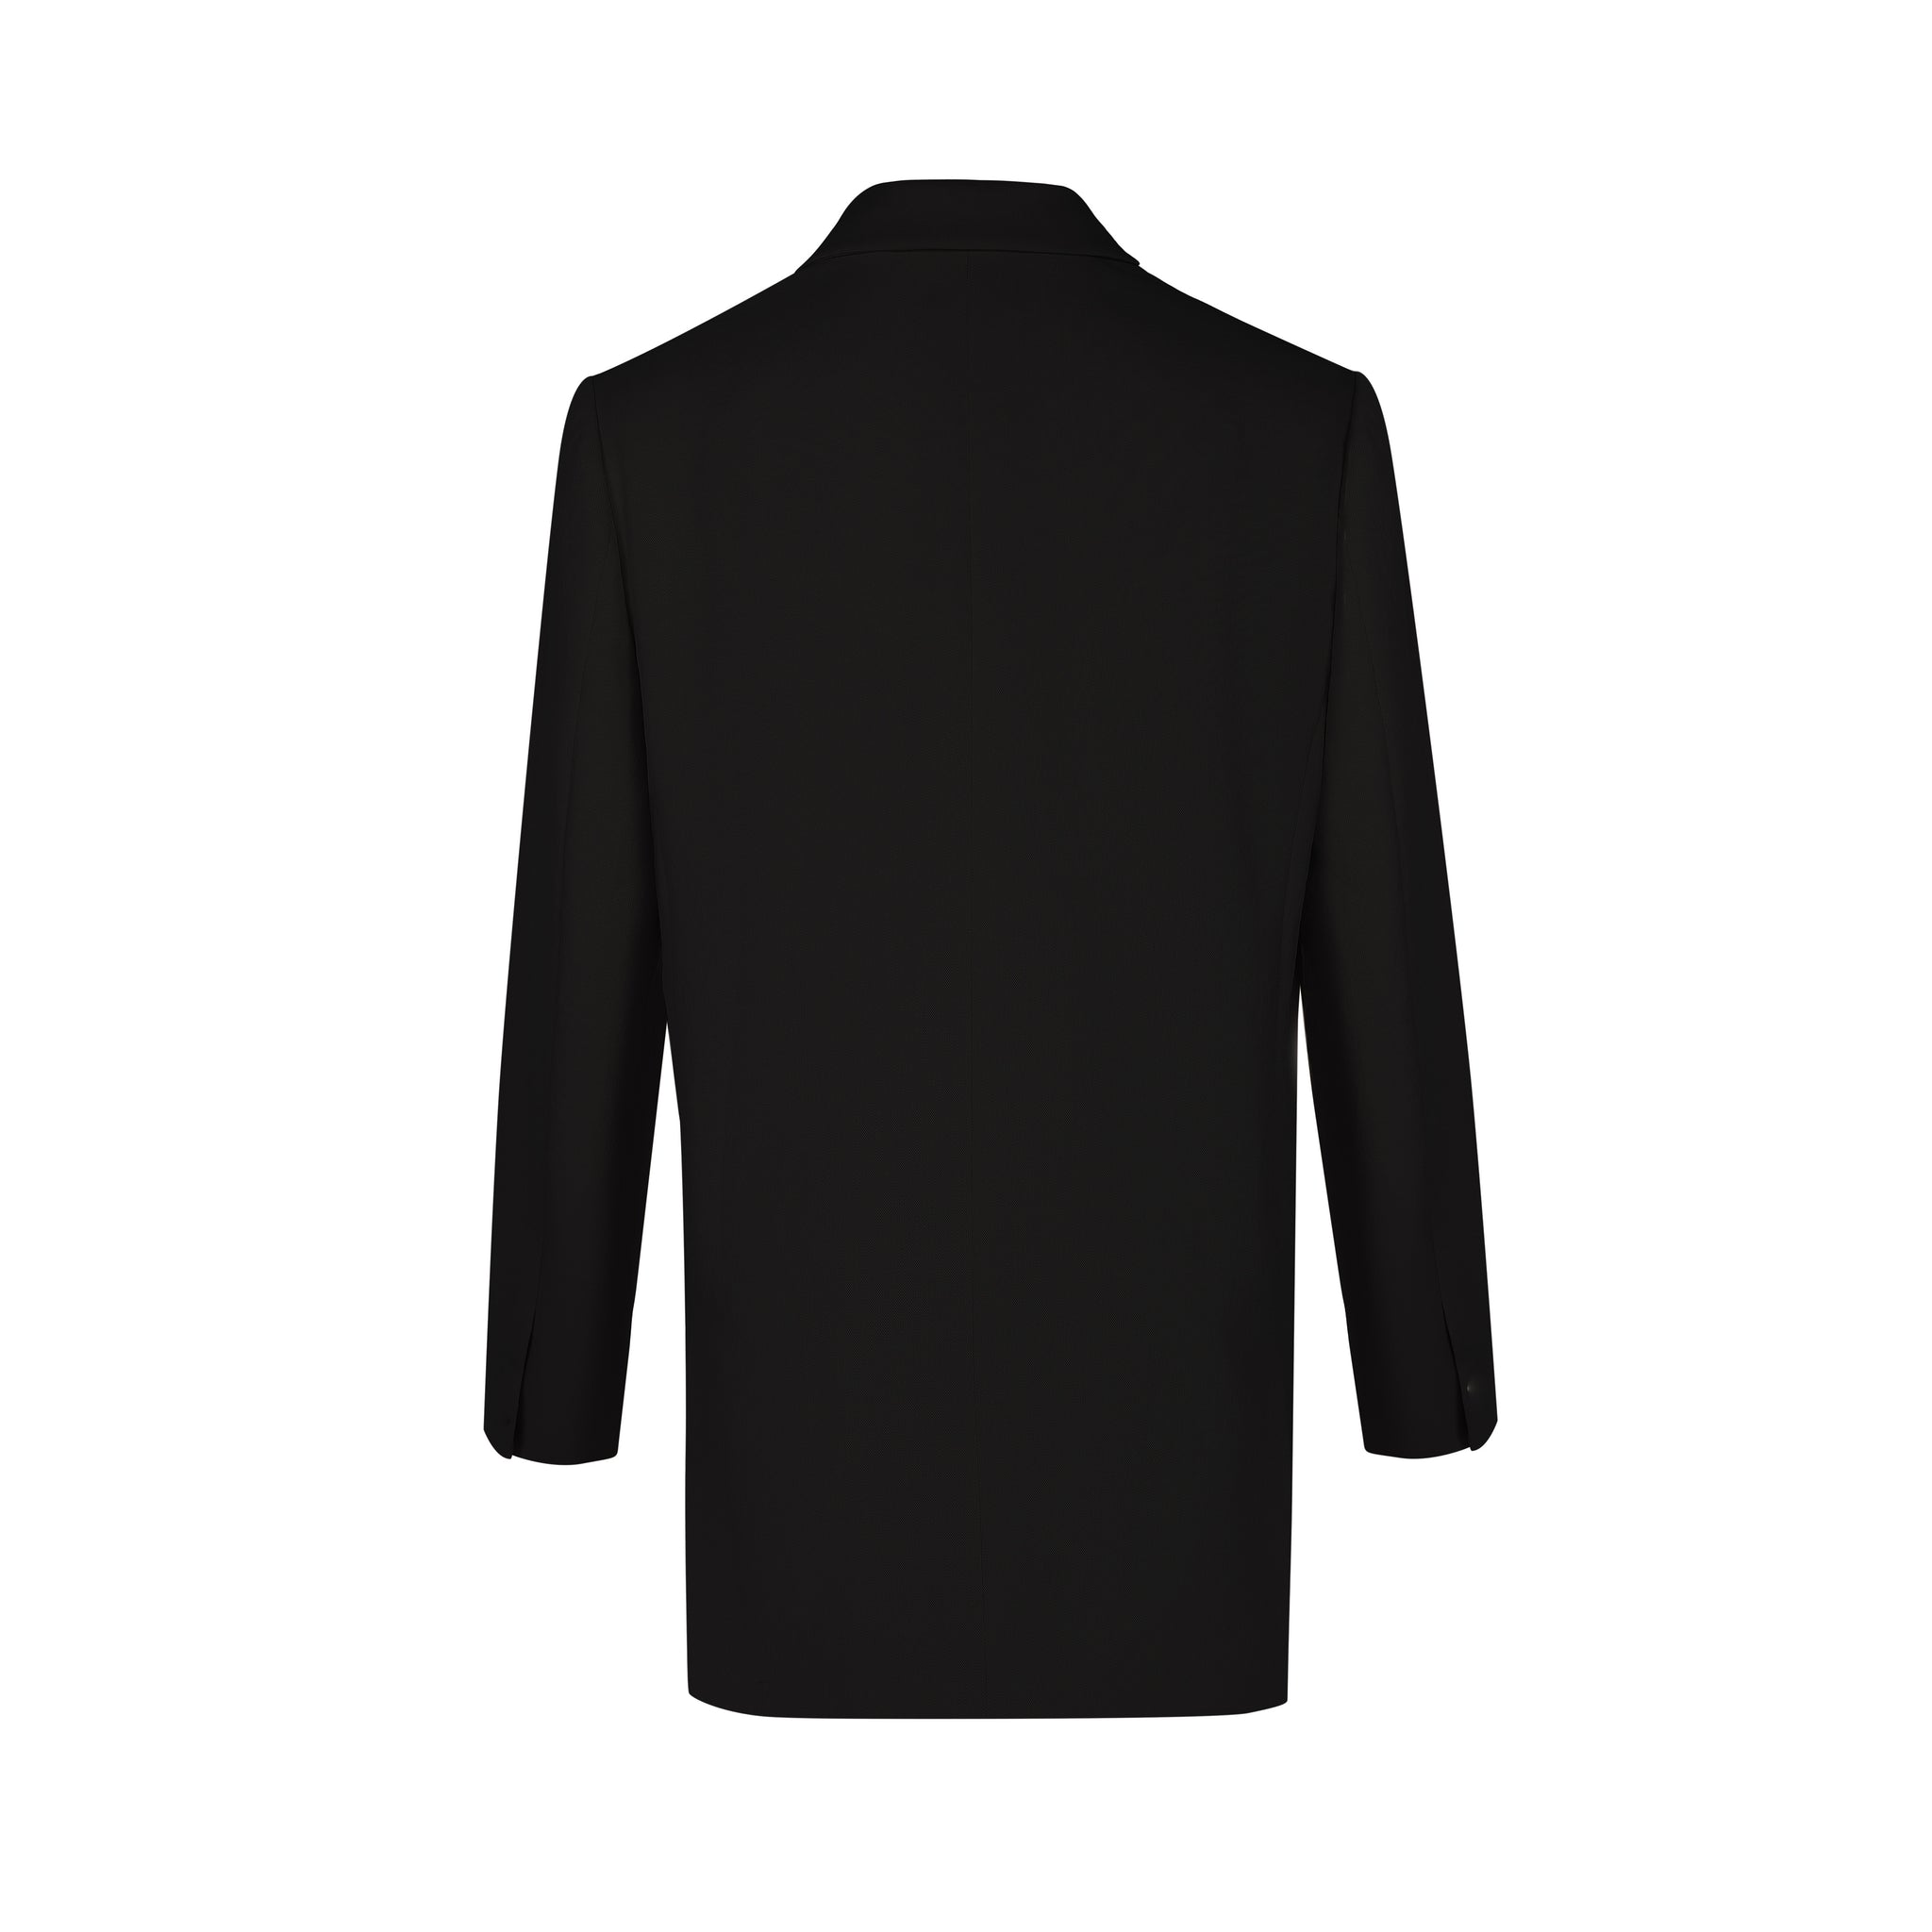 Bowie Tailored Man's Jacket - Black